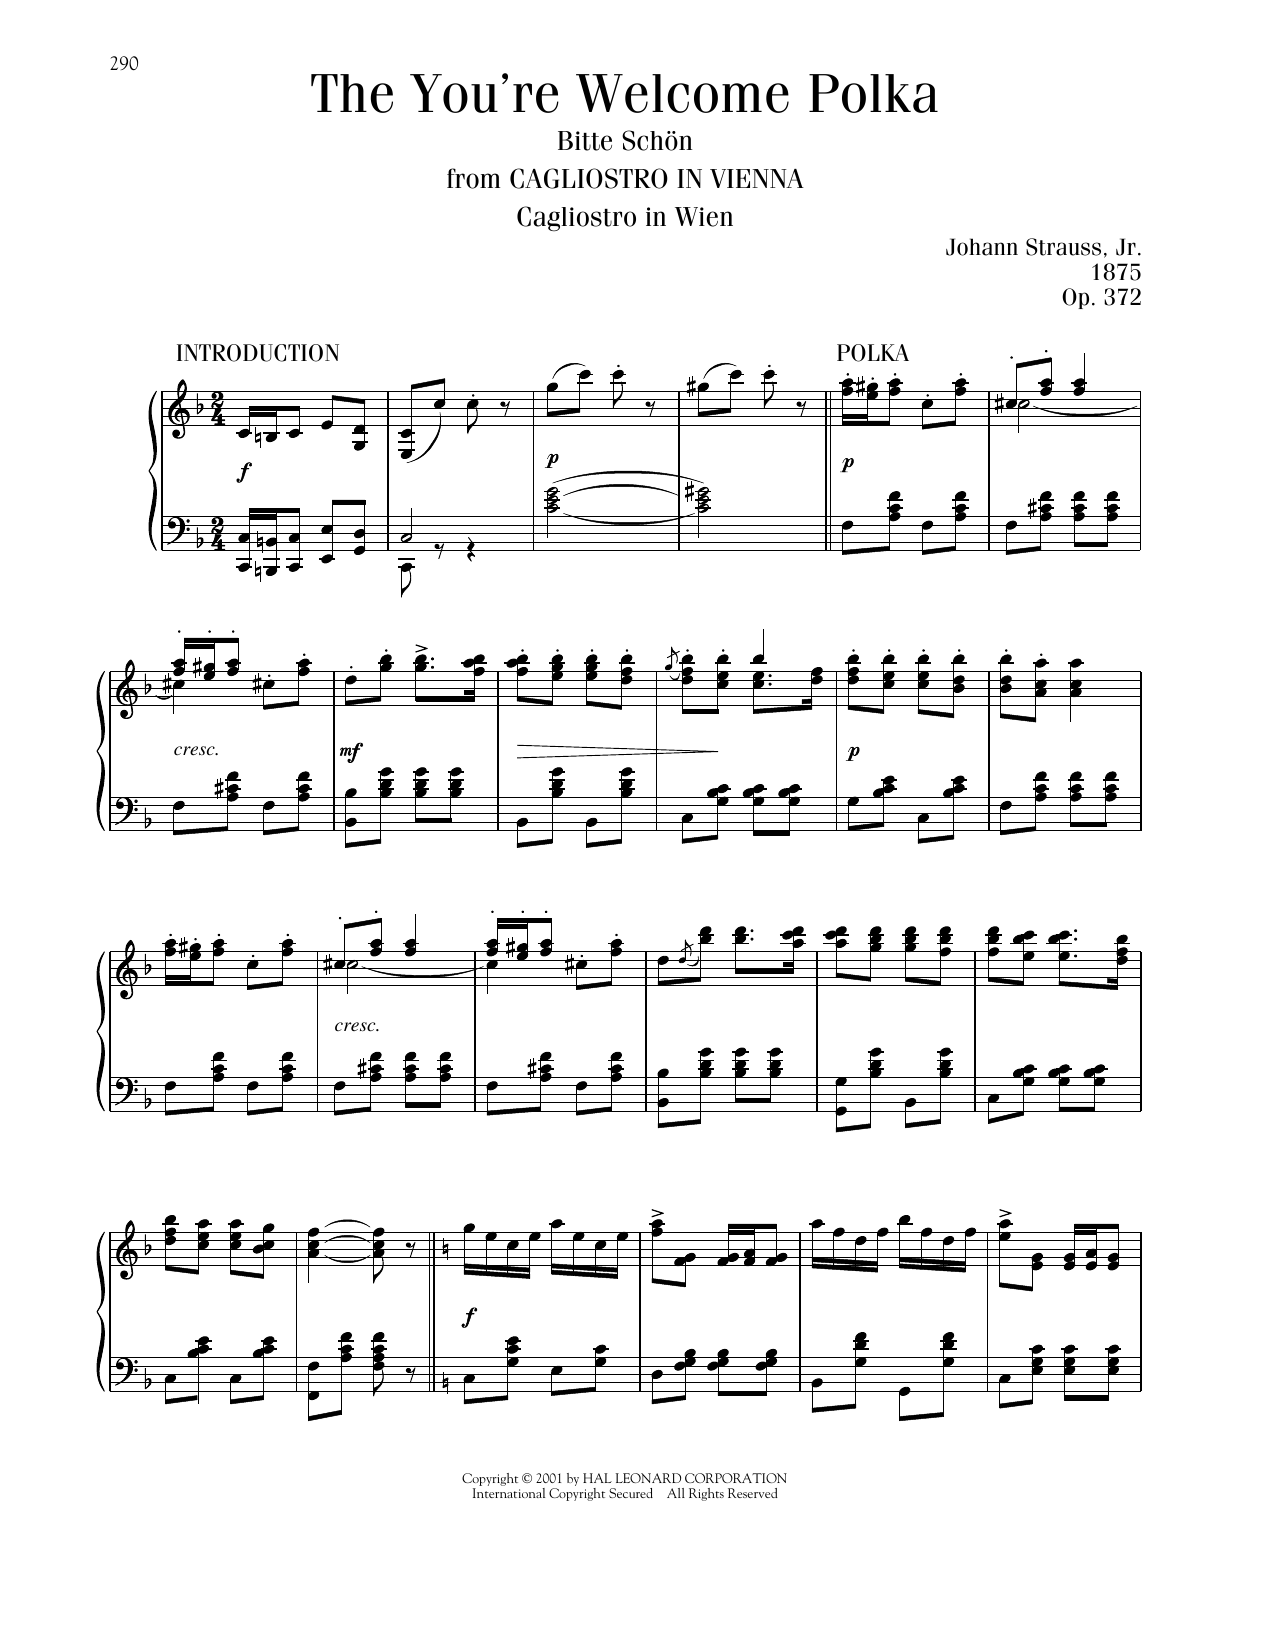 Johann Strauss The You're Welcome Polka, Op. 372 sheet music notes printable PDF score